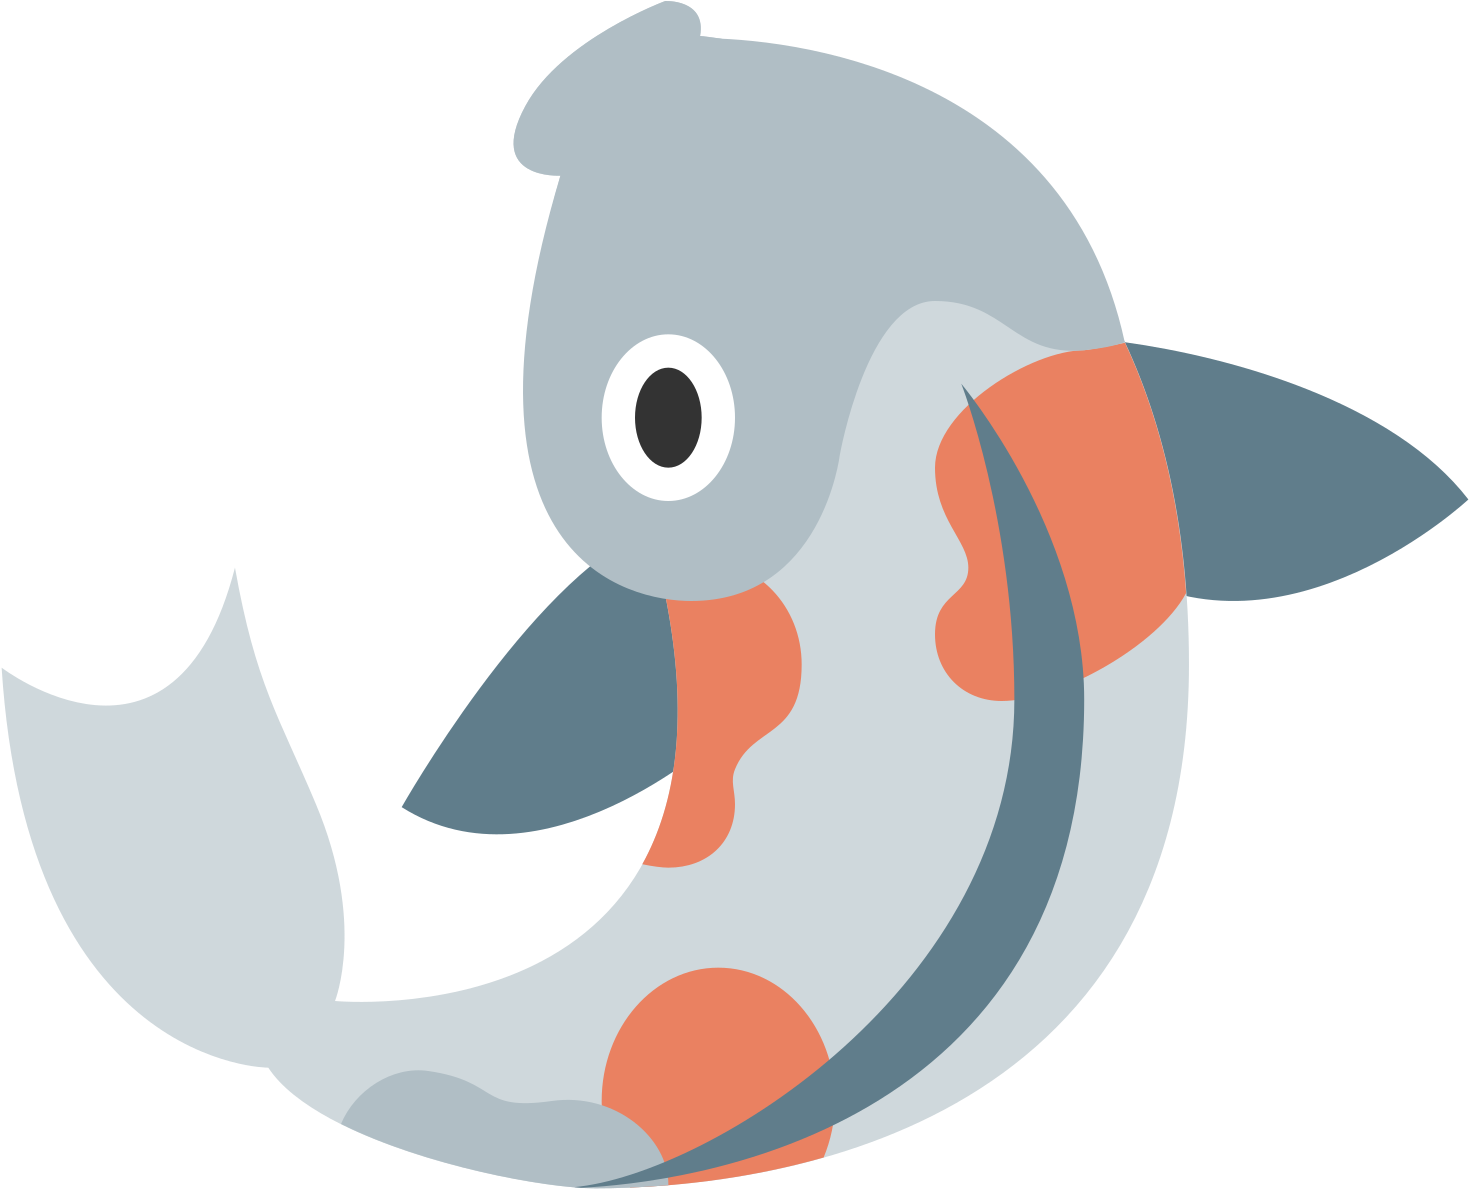 A Cartoon Fish With Orange And Grey Spots